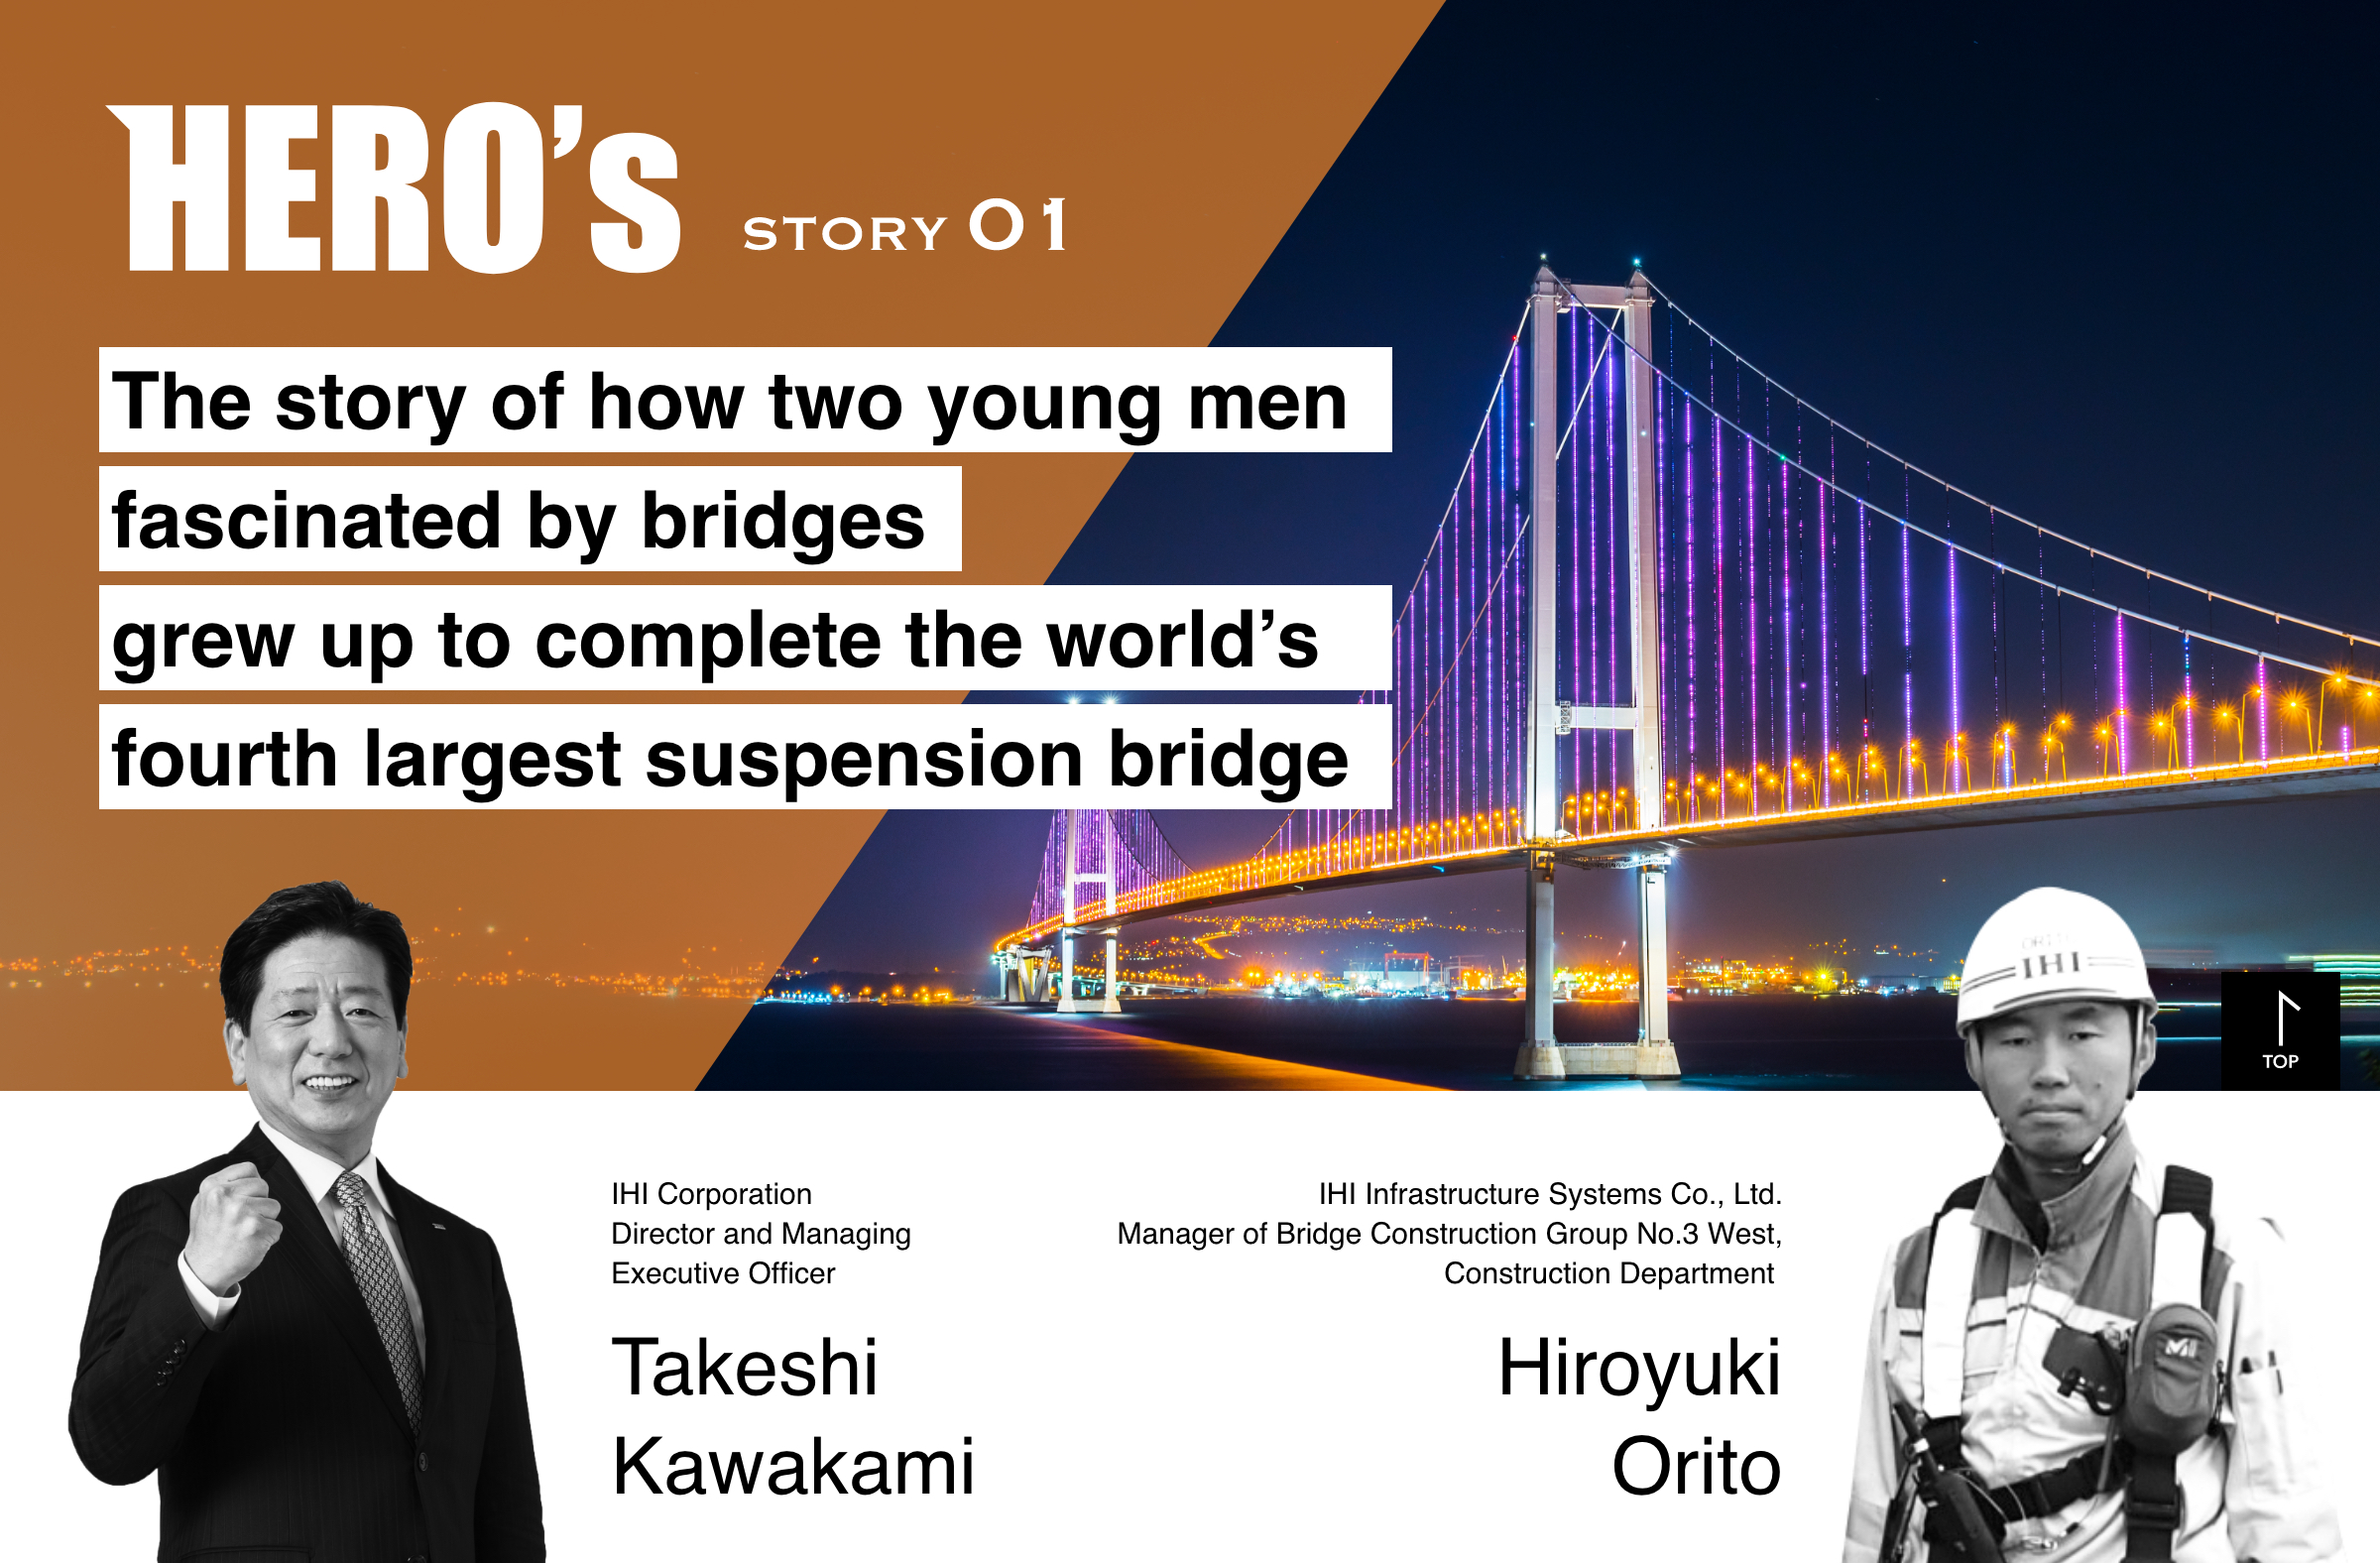 HERO's STORY 01 The story of how two young men fascinated by bridges grew up to complete the world’s fourth largest suspension bridge IHI Corporation Director and Managing Executive Officer Takeshi Kawakami IHI Infrastructure Systems Co., Ltd. Manager of Bridge Construction Group No.3 West, Construction Department Hiroyuki Orito